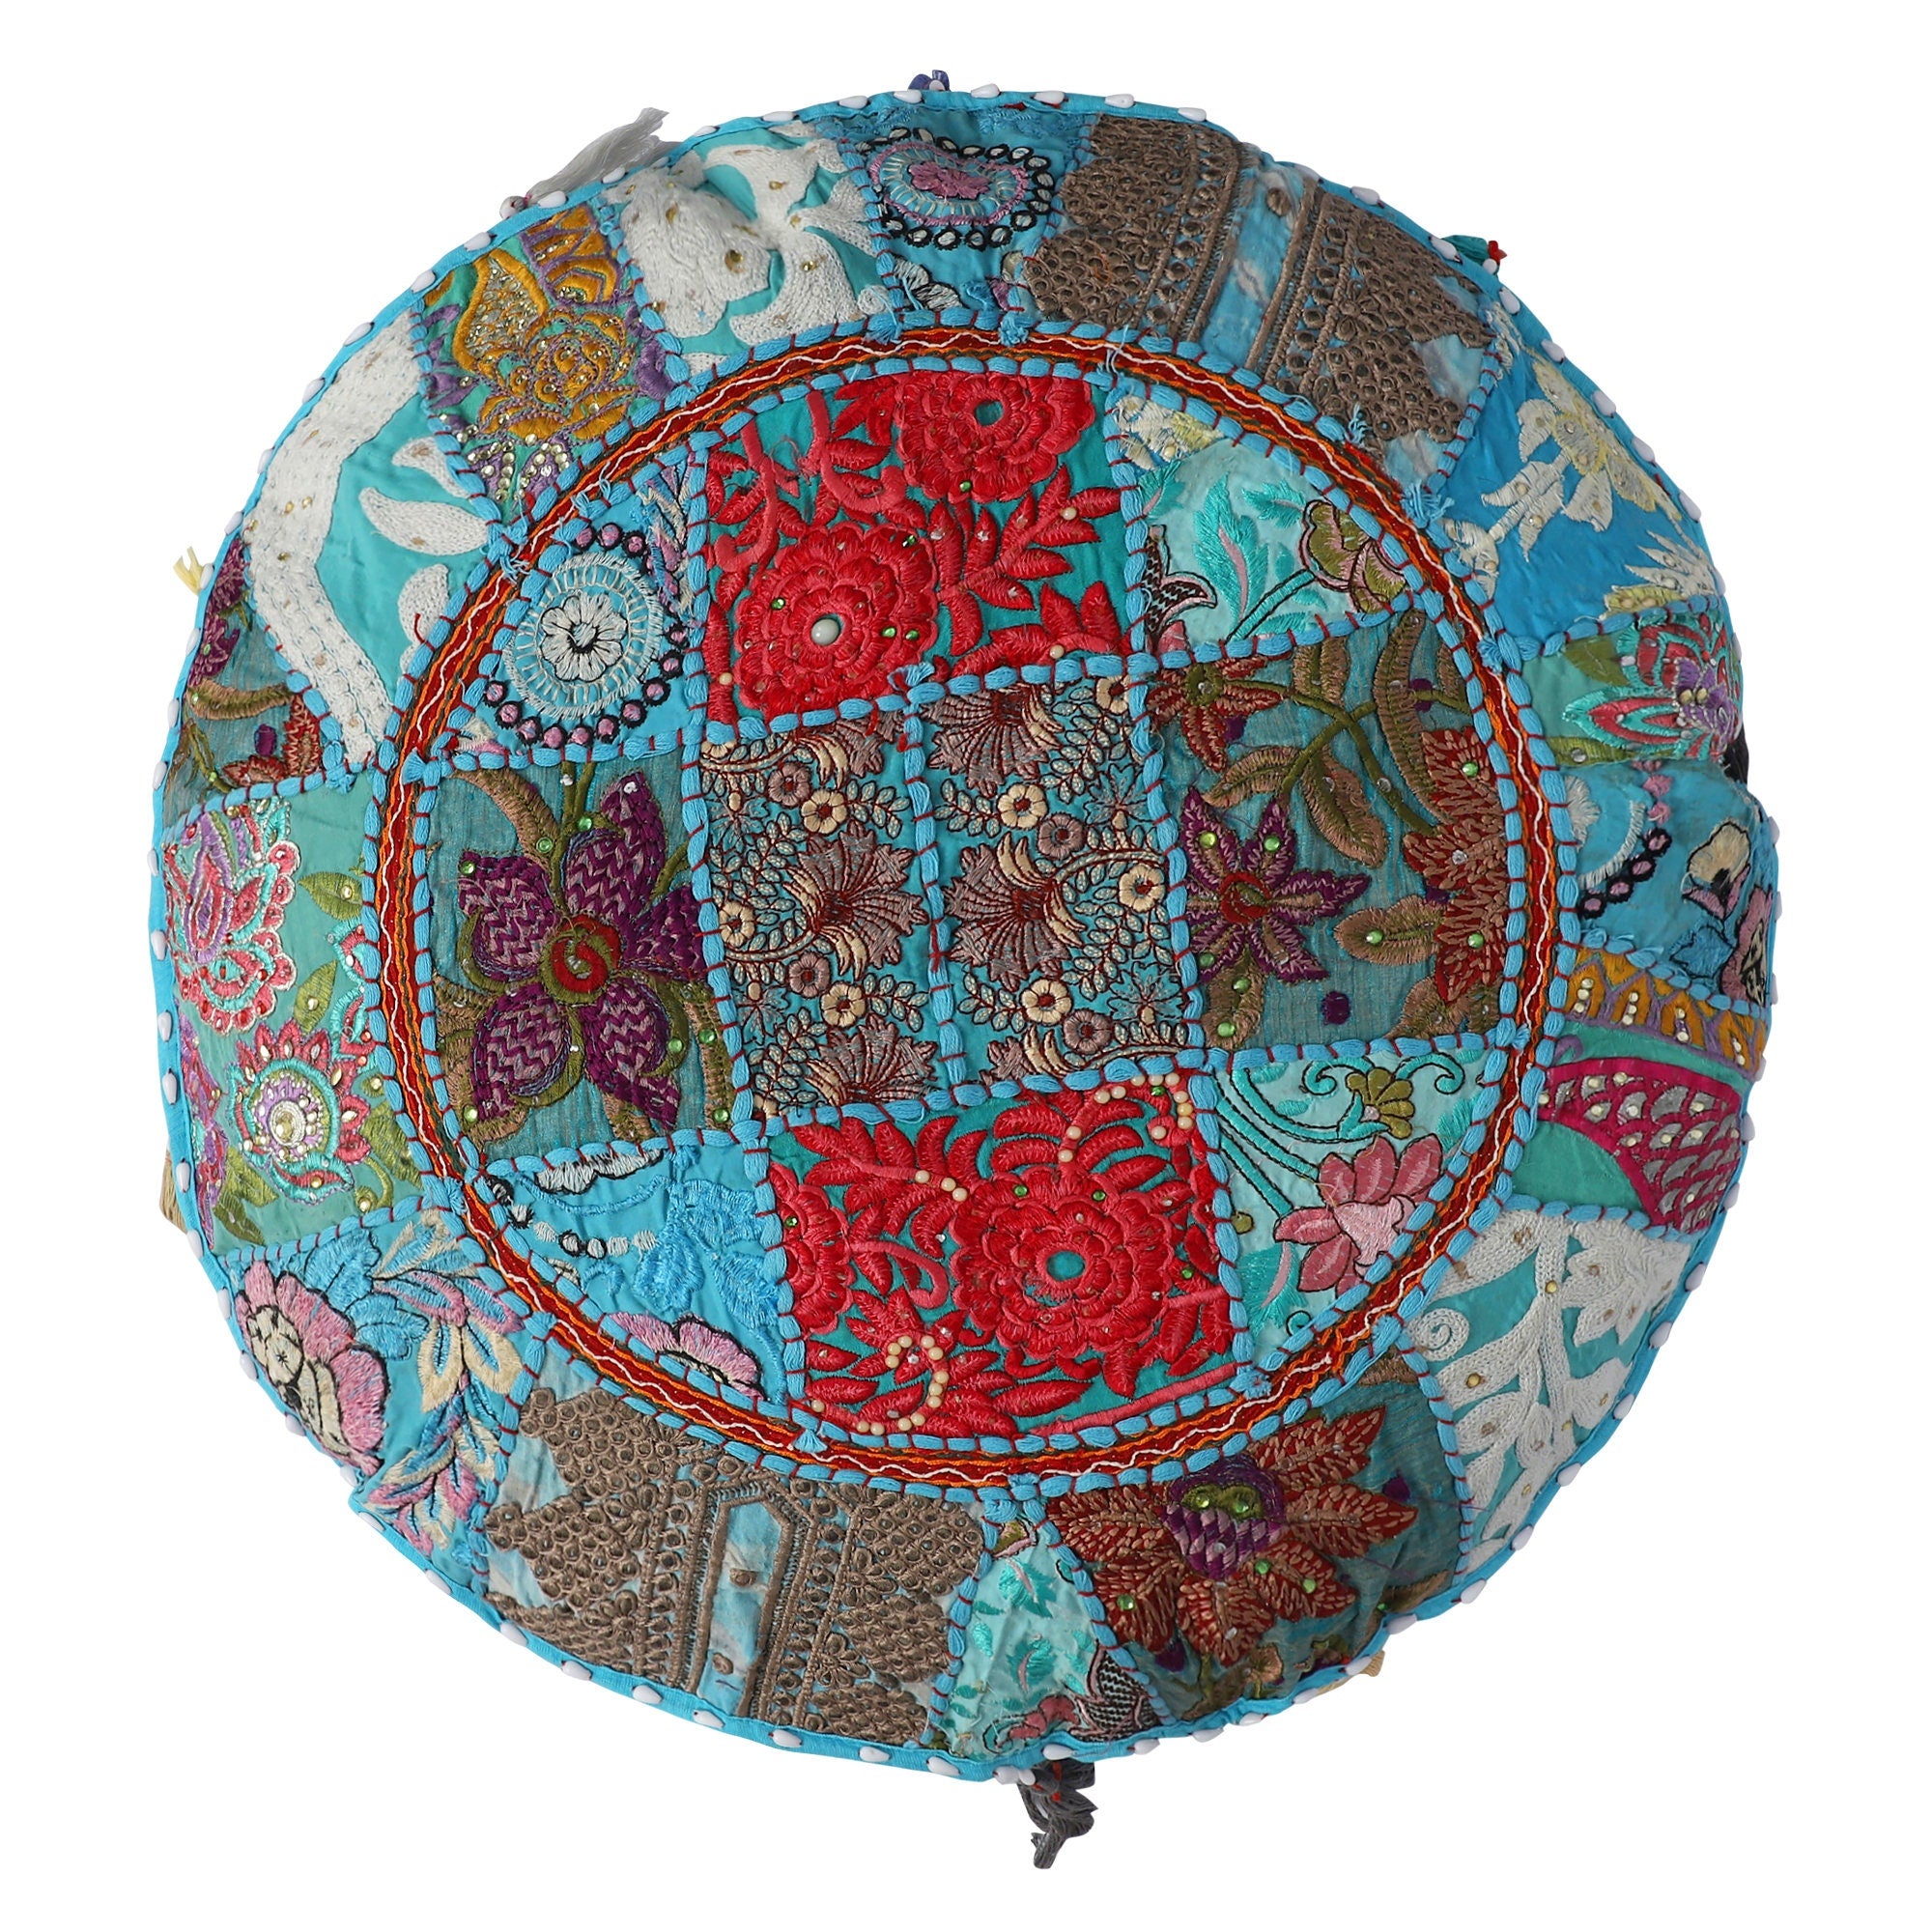 Embroidered Round Cushion Cover, Vintage Wall Hanging -  SkyBlue